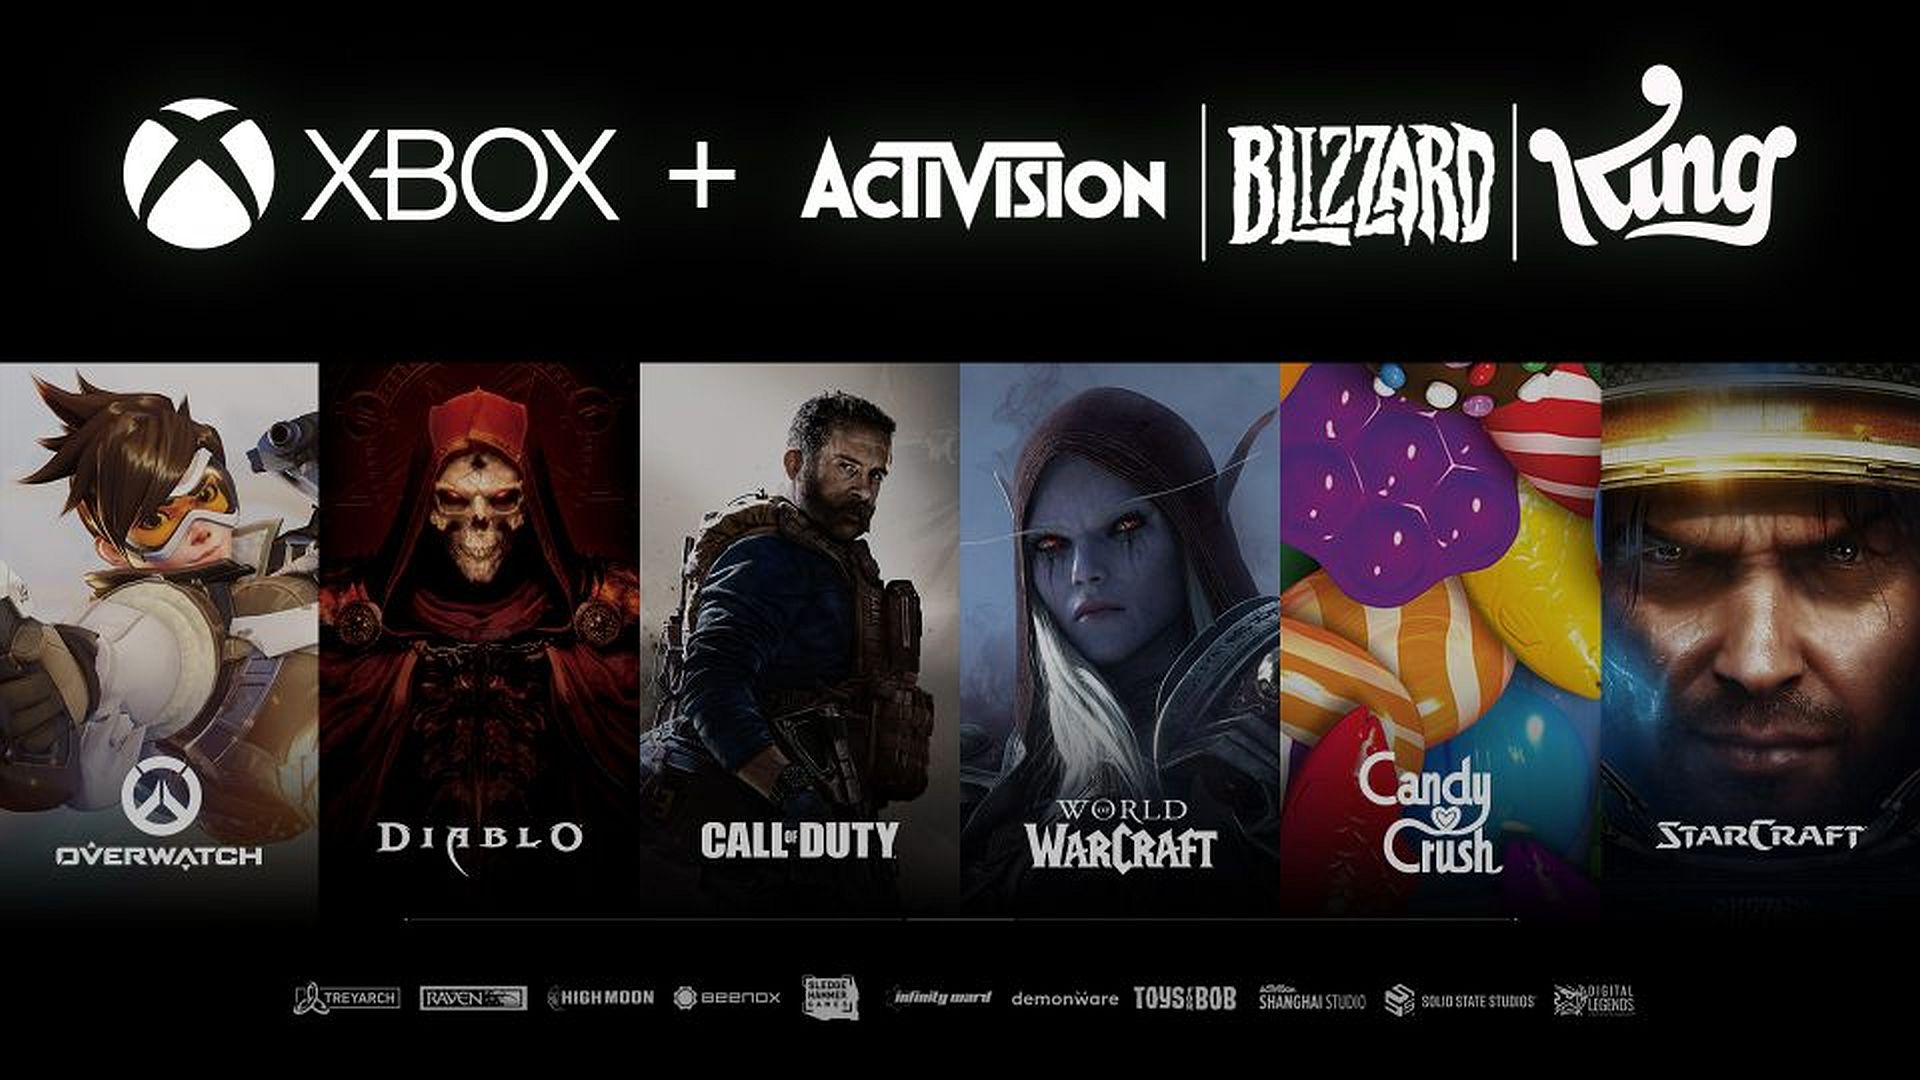 Microsoft: Activision Blizzard Games are for All